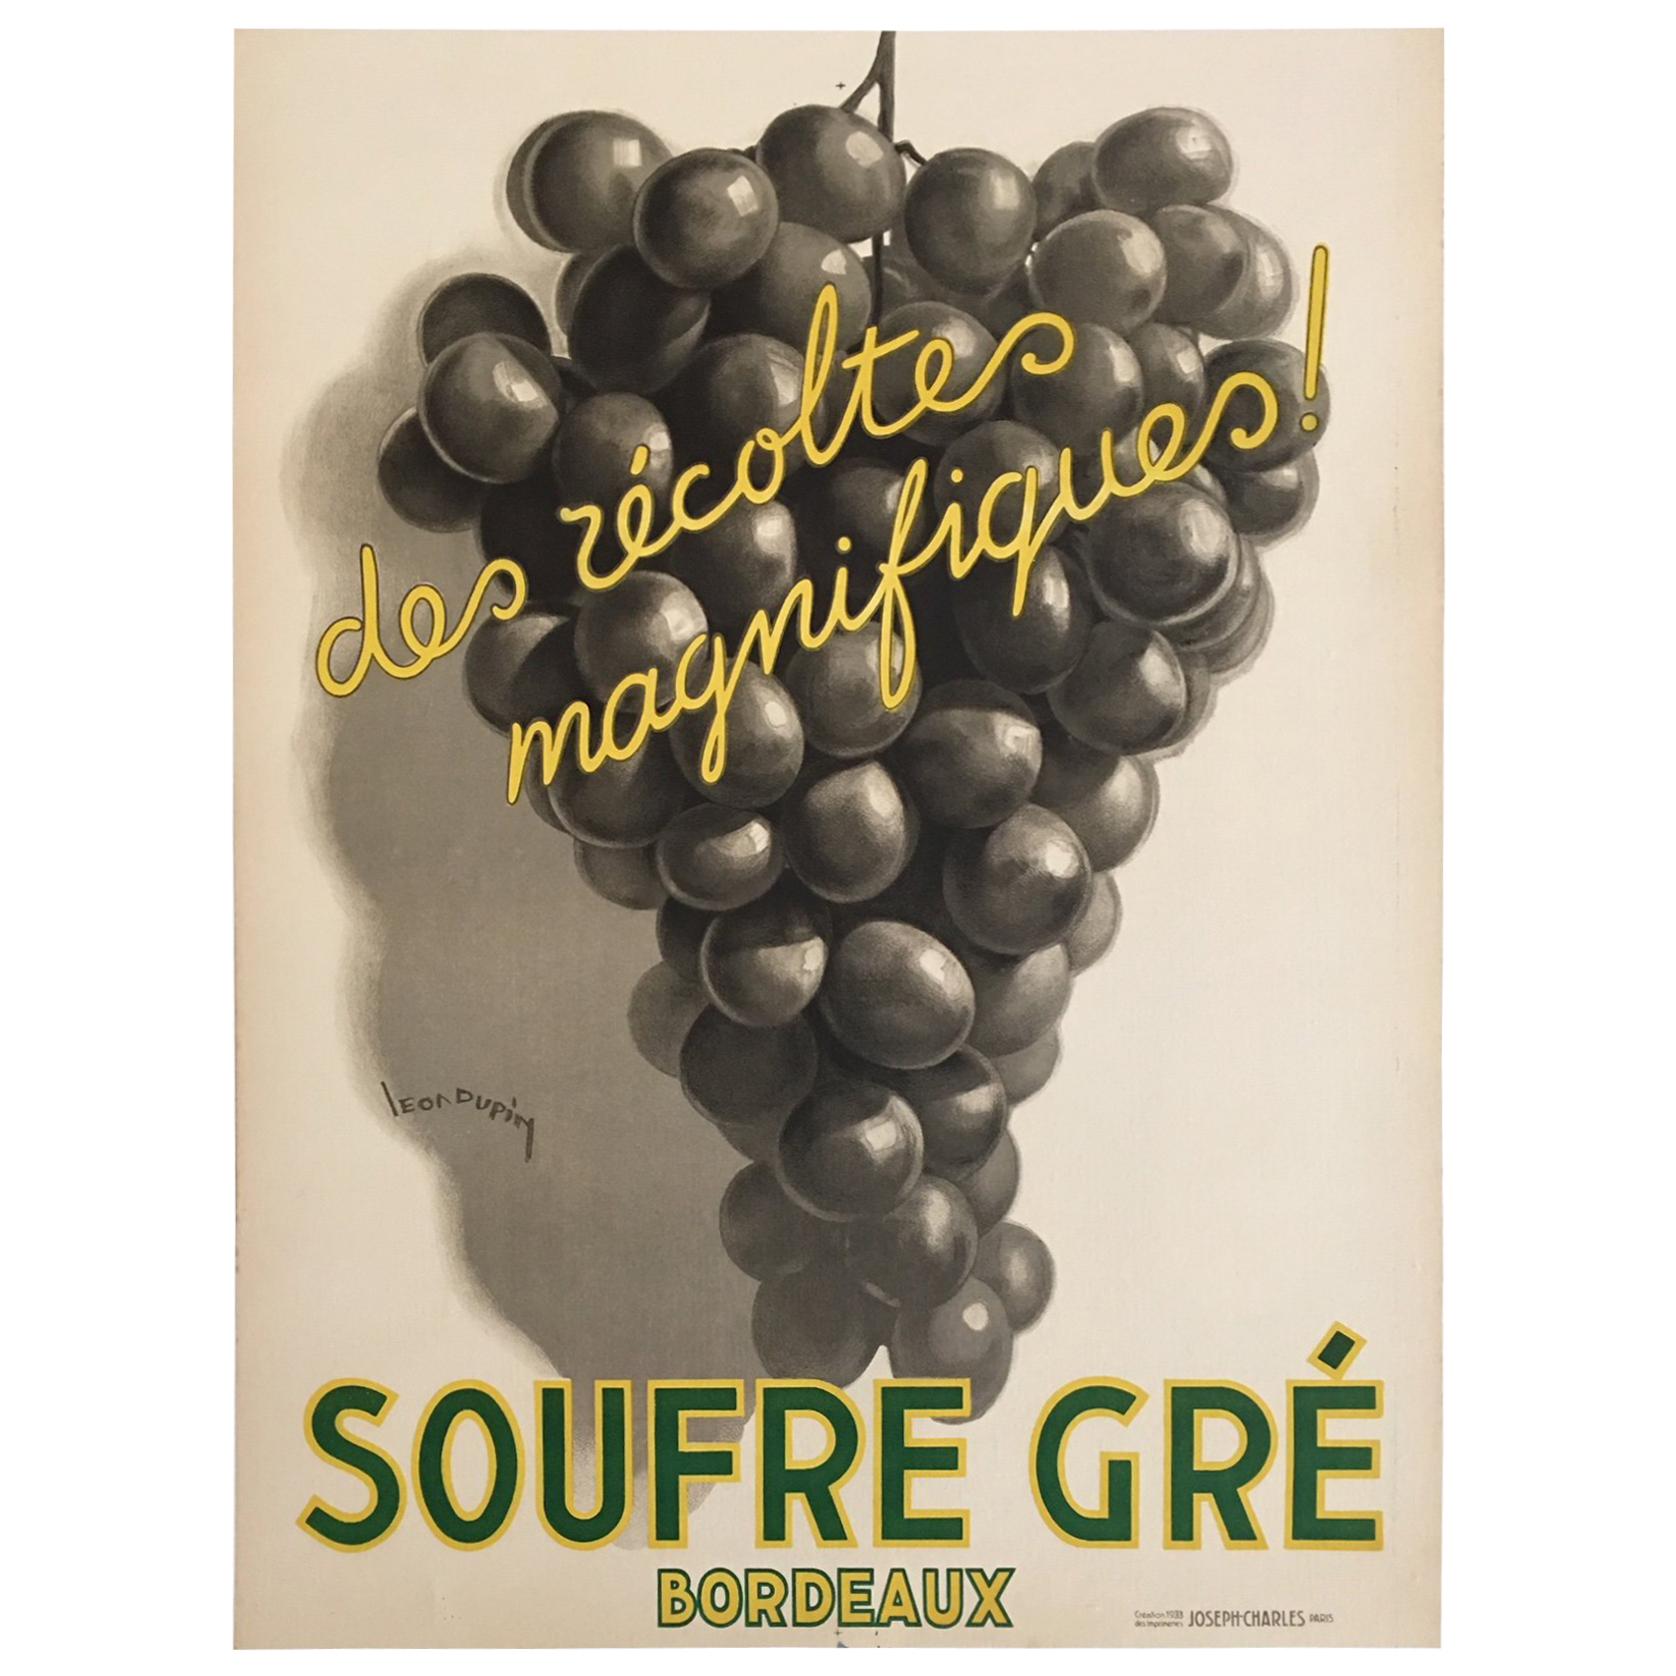 Original Vintage French Art Deco Wine Poster, Soufre Gre, 1933 by Leon Dupin